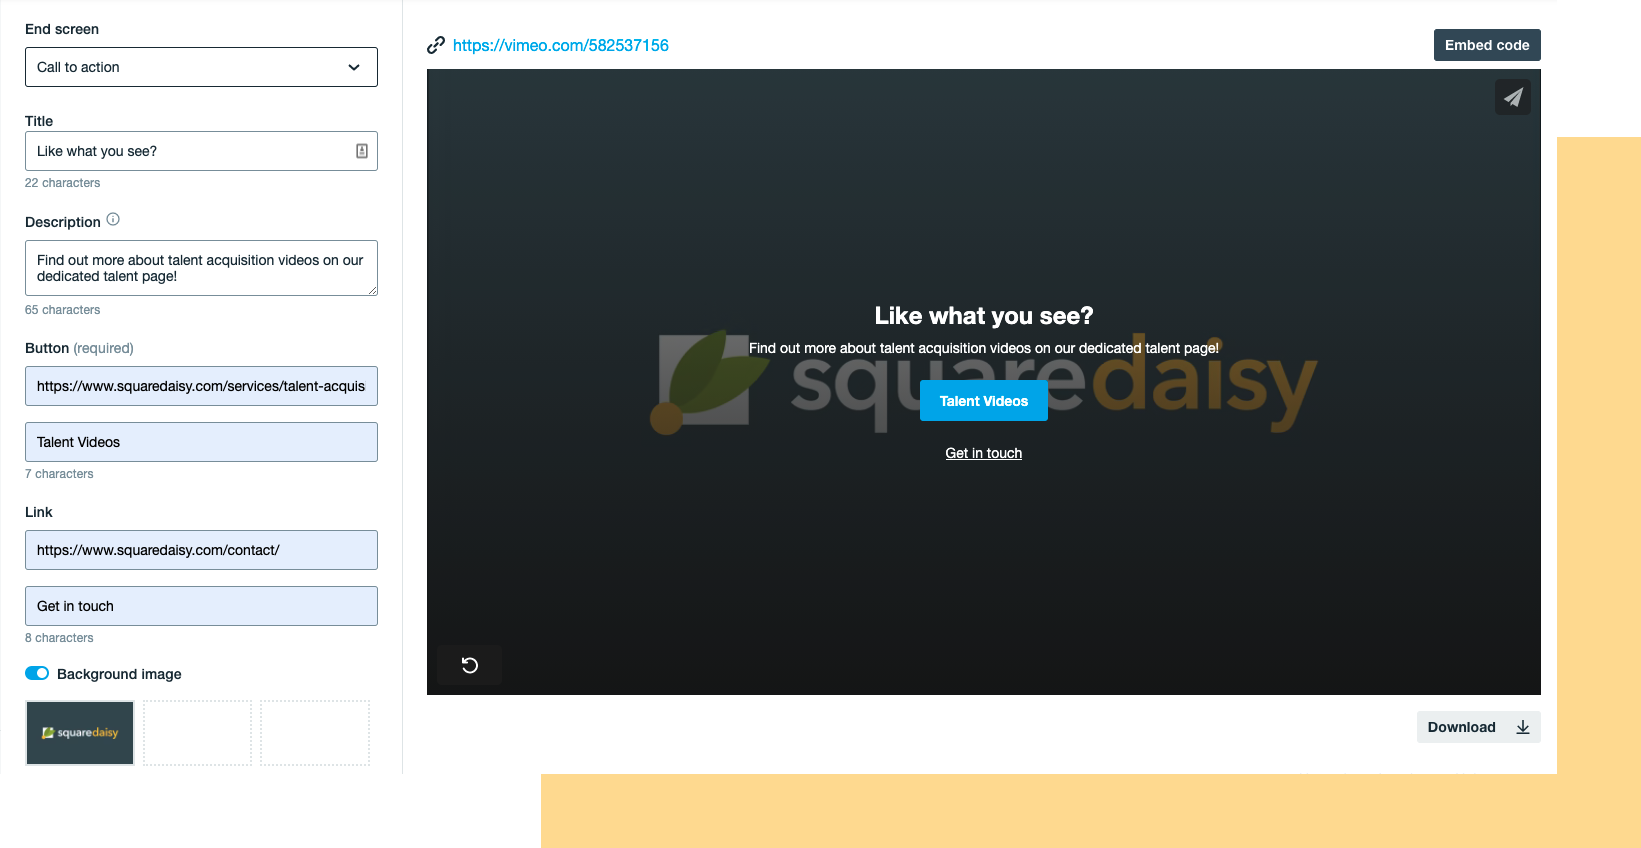 Screenshot example of Vimeo Call-to-action End Screen